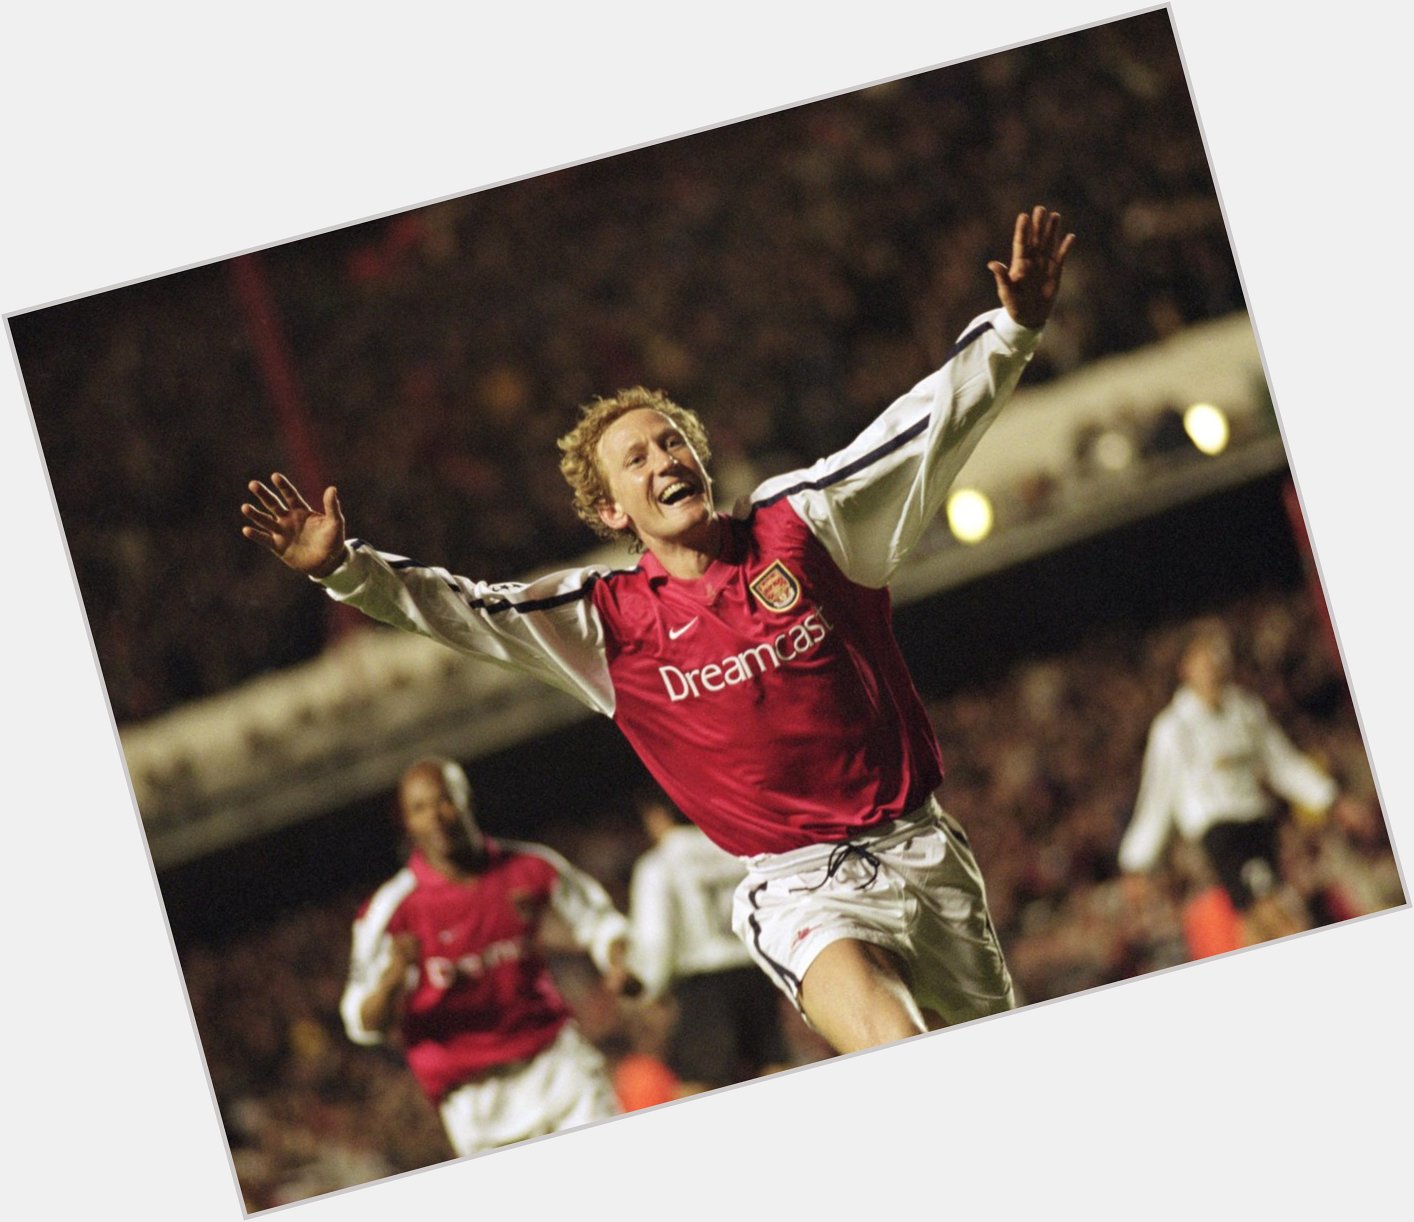  Happy birthday to former Arsenal player, Ray Parlour!  